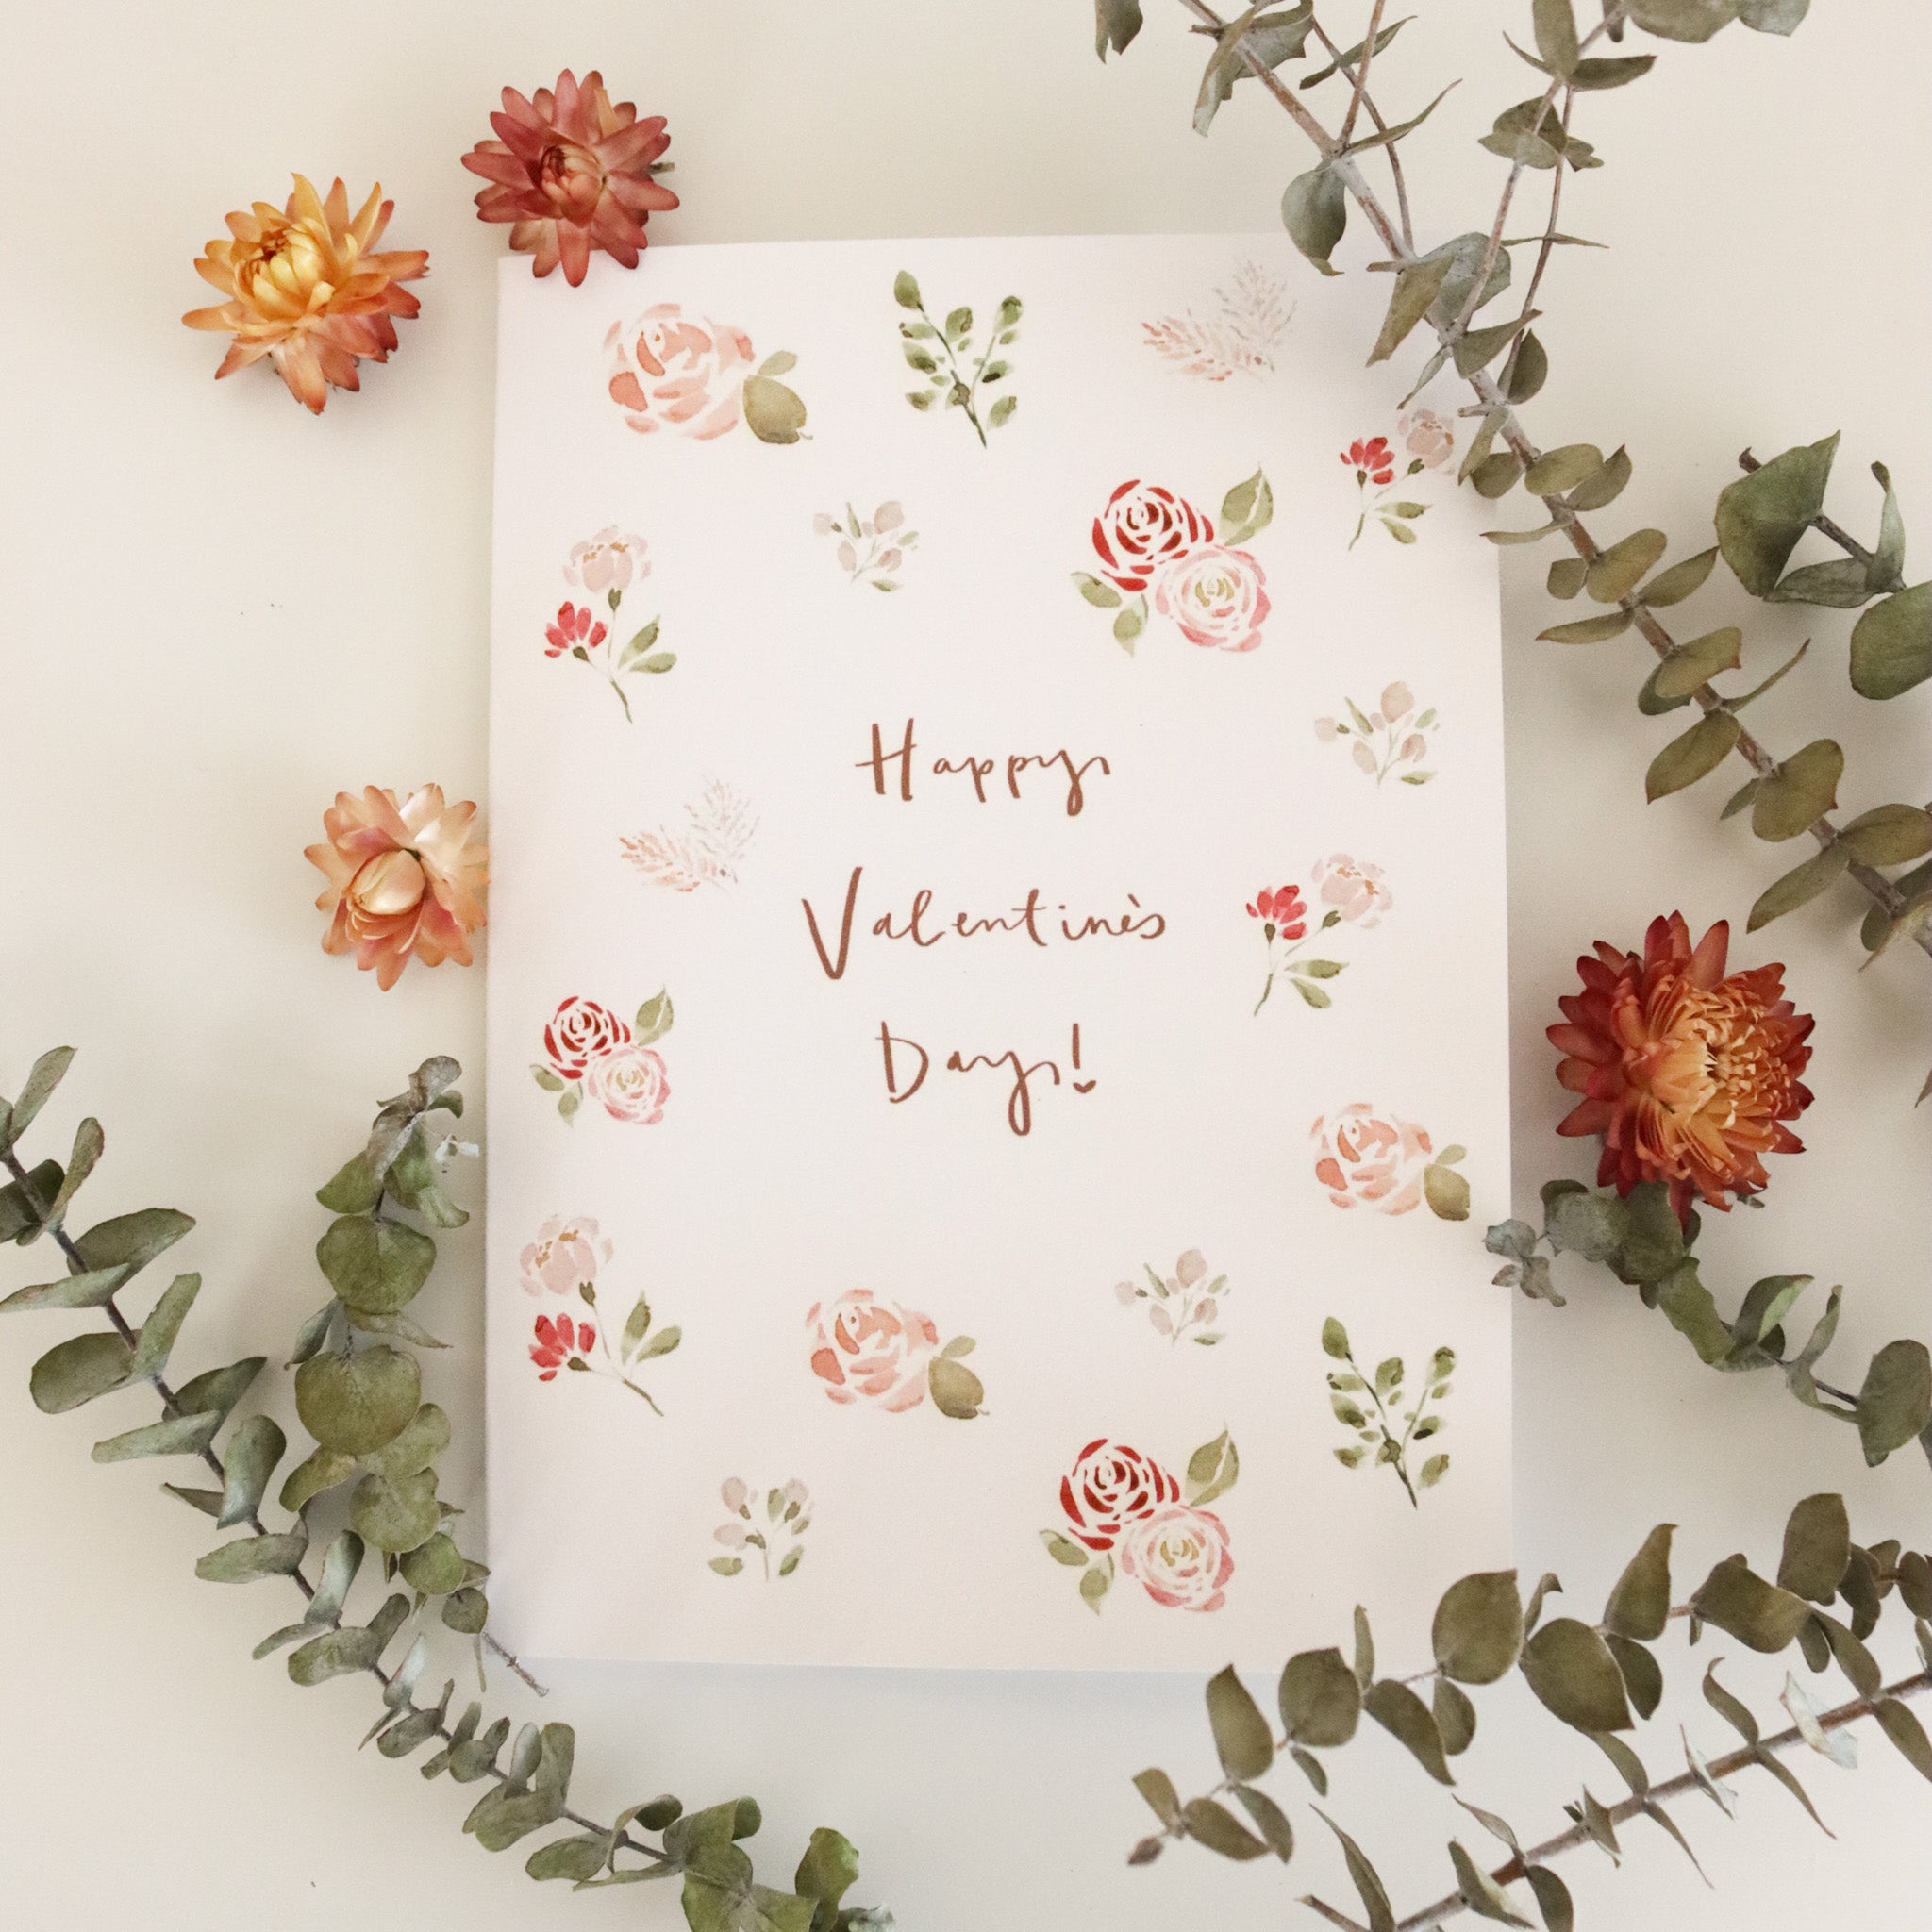 "Happy Valentine's Day" Loose Blooms Card